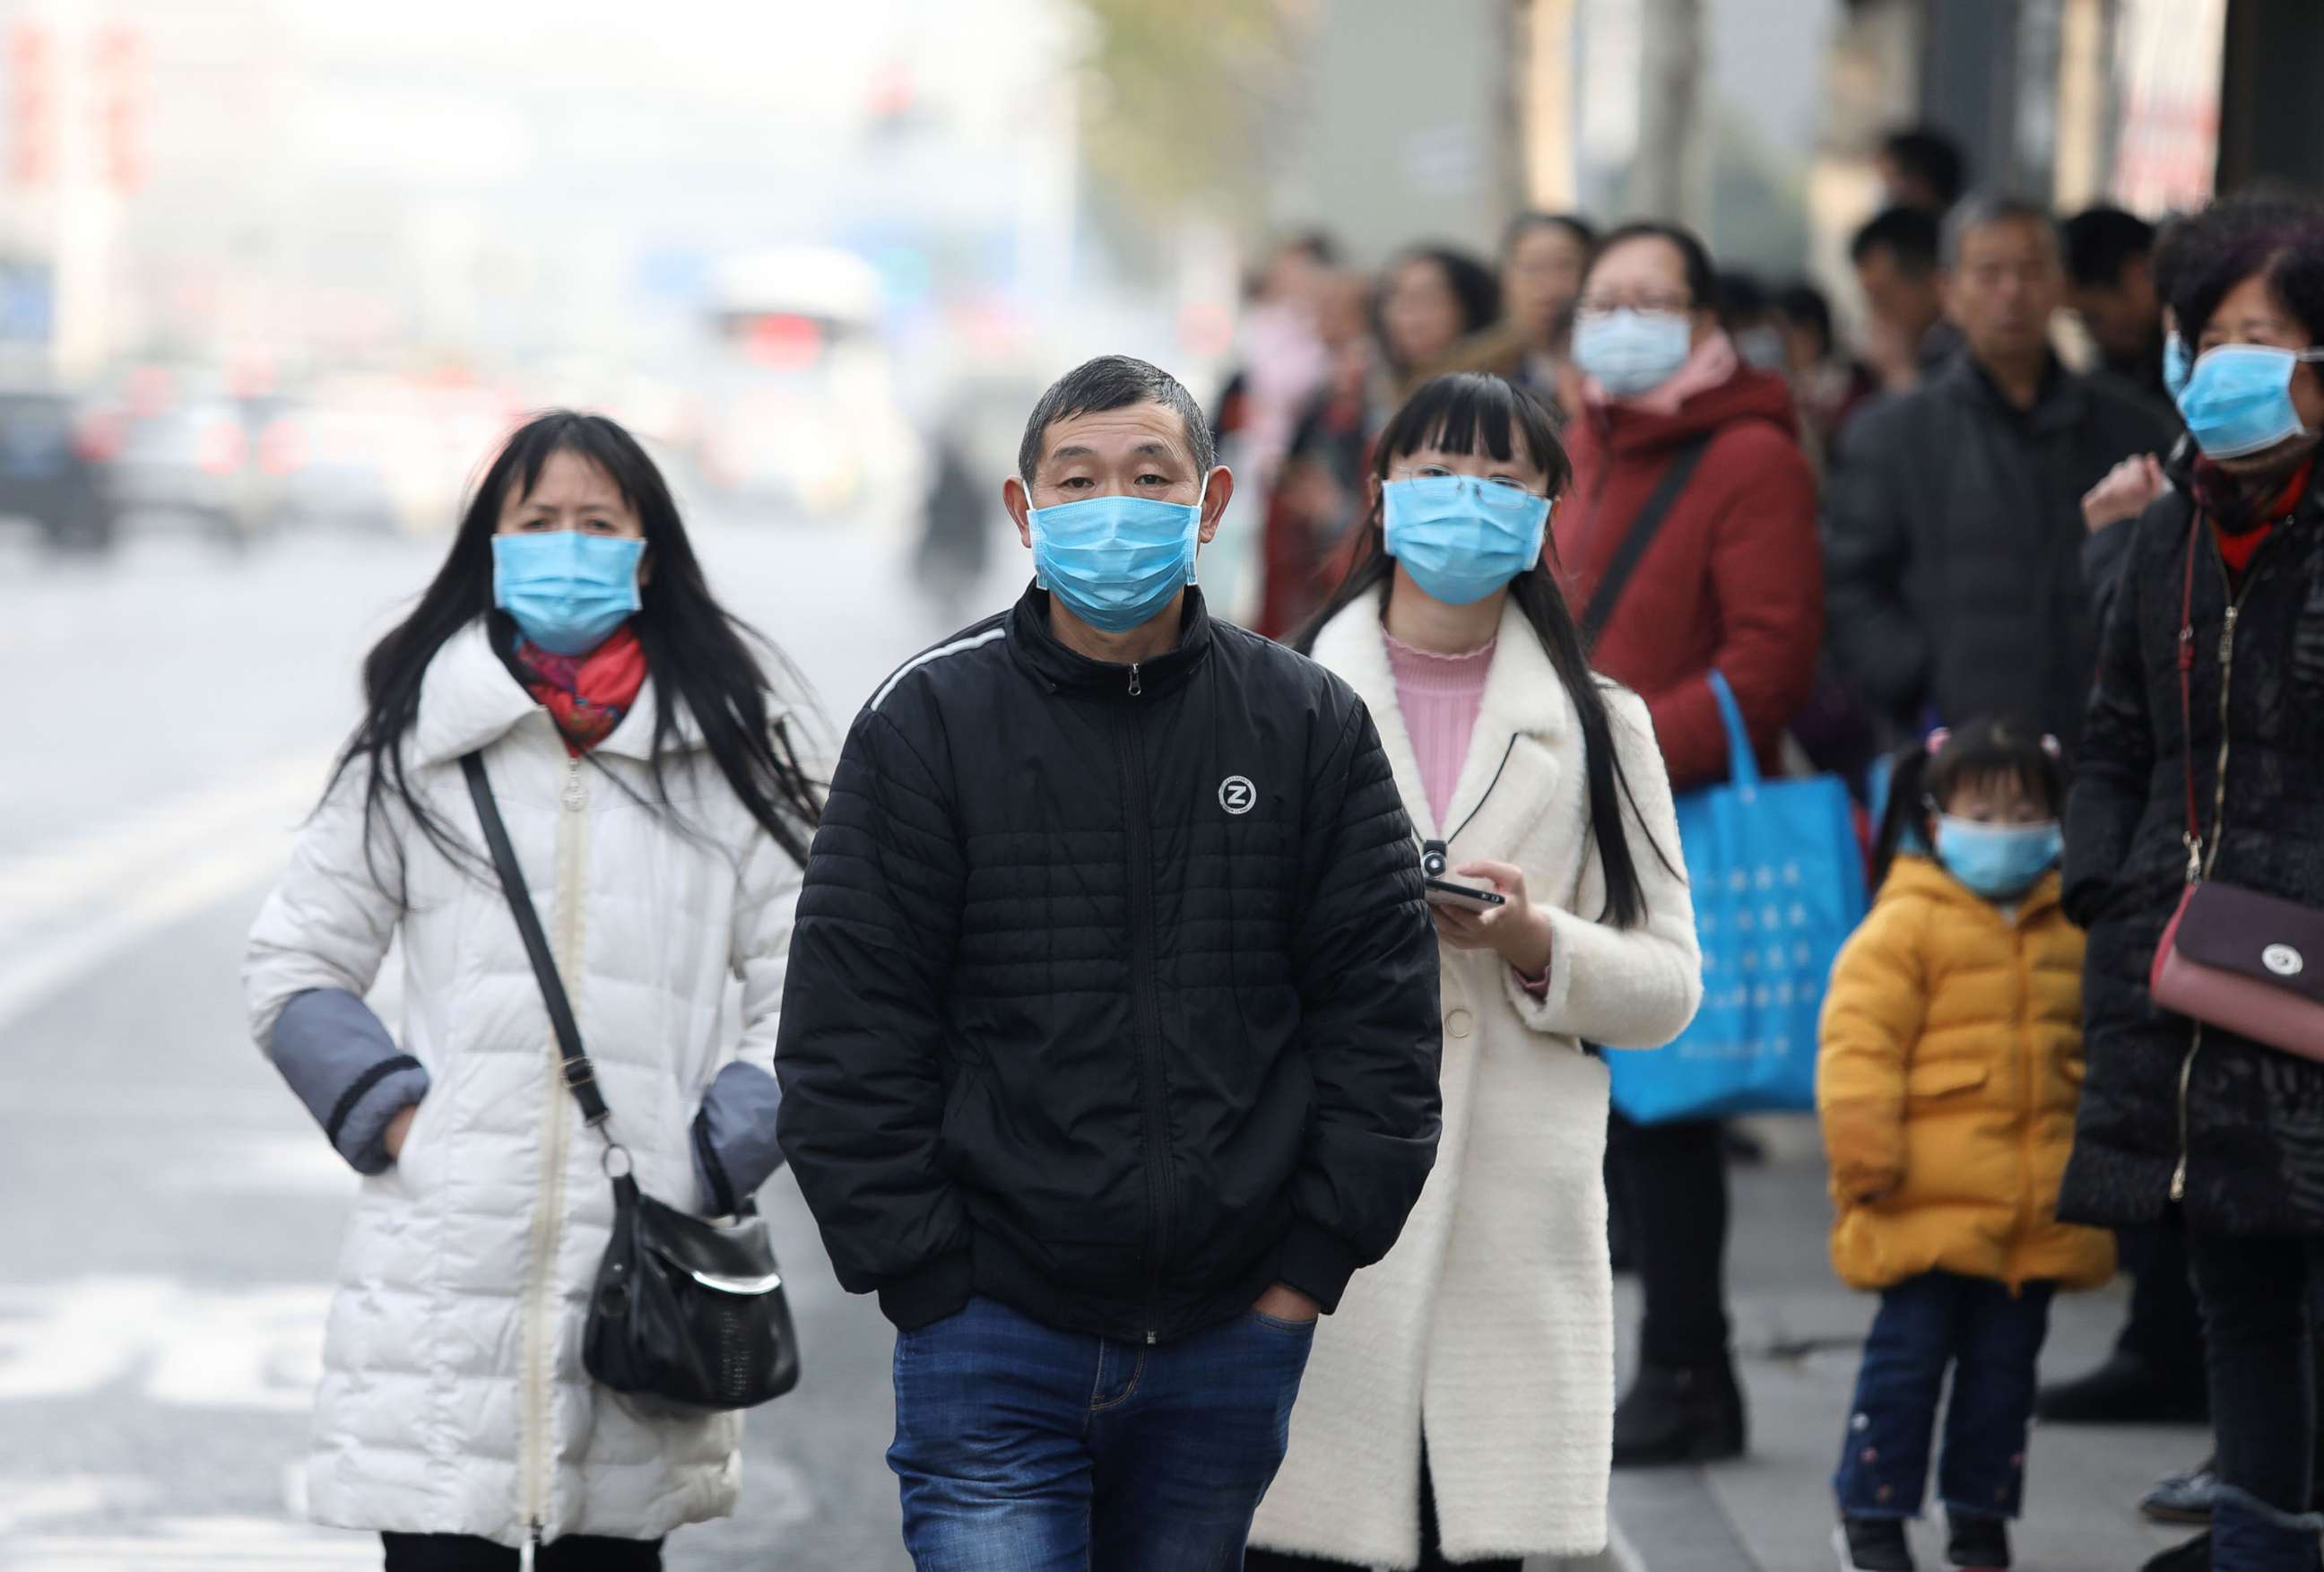 PHOTO: Chinese residents wear masks near the closed Huanan Seafood Wholesale Market, which has been linked to cases of a new strain of Coronavirus identified as the cause of the pneumonia outbreak in Wuhan, Hubei province, China, Jan. 20, 2020.